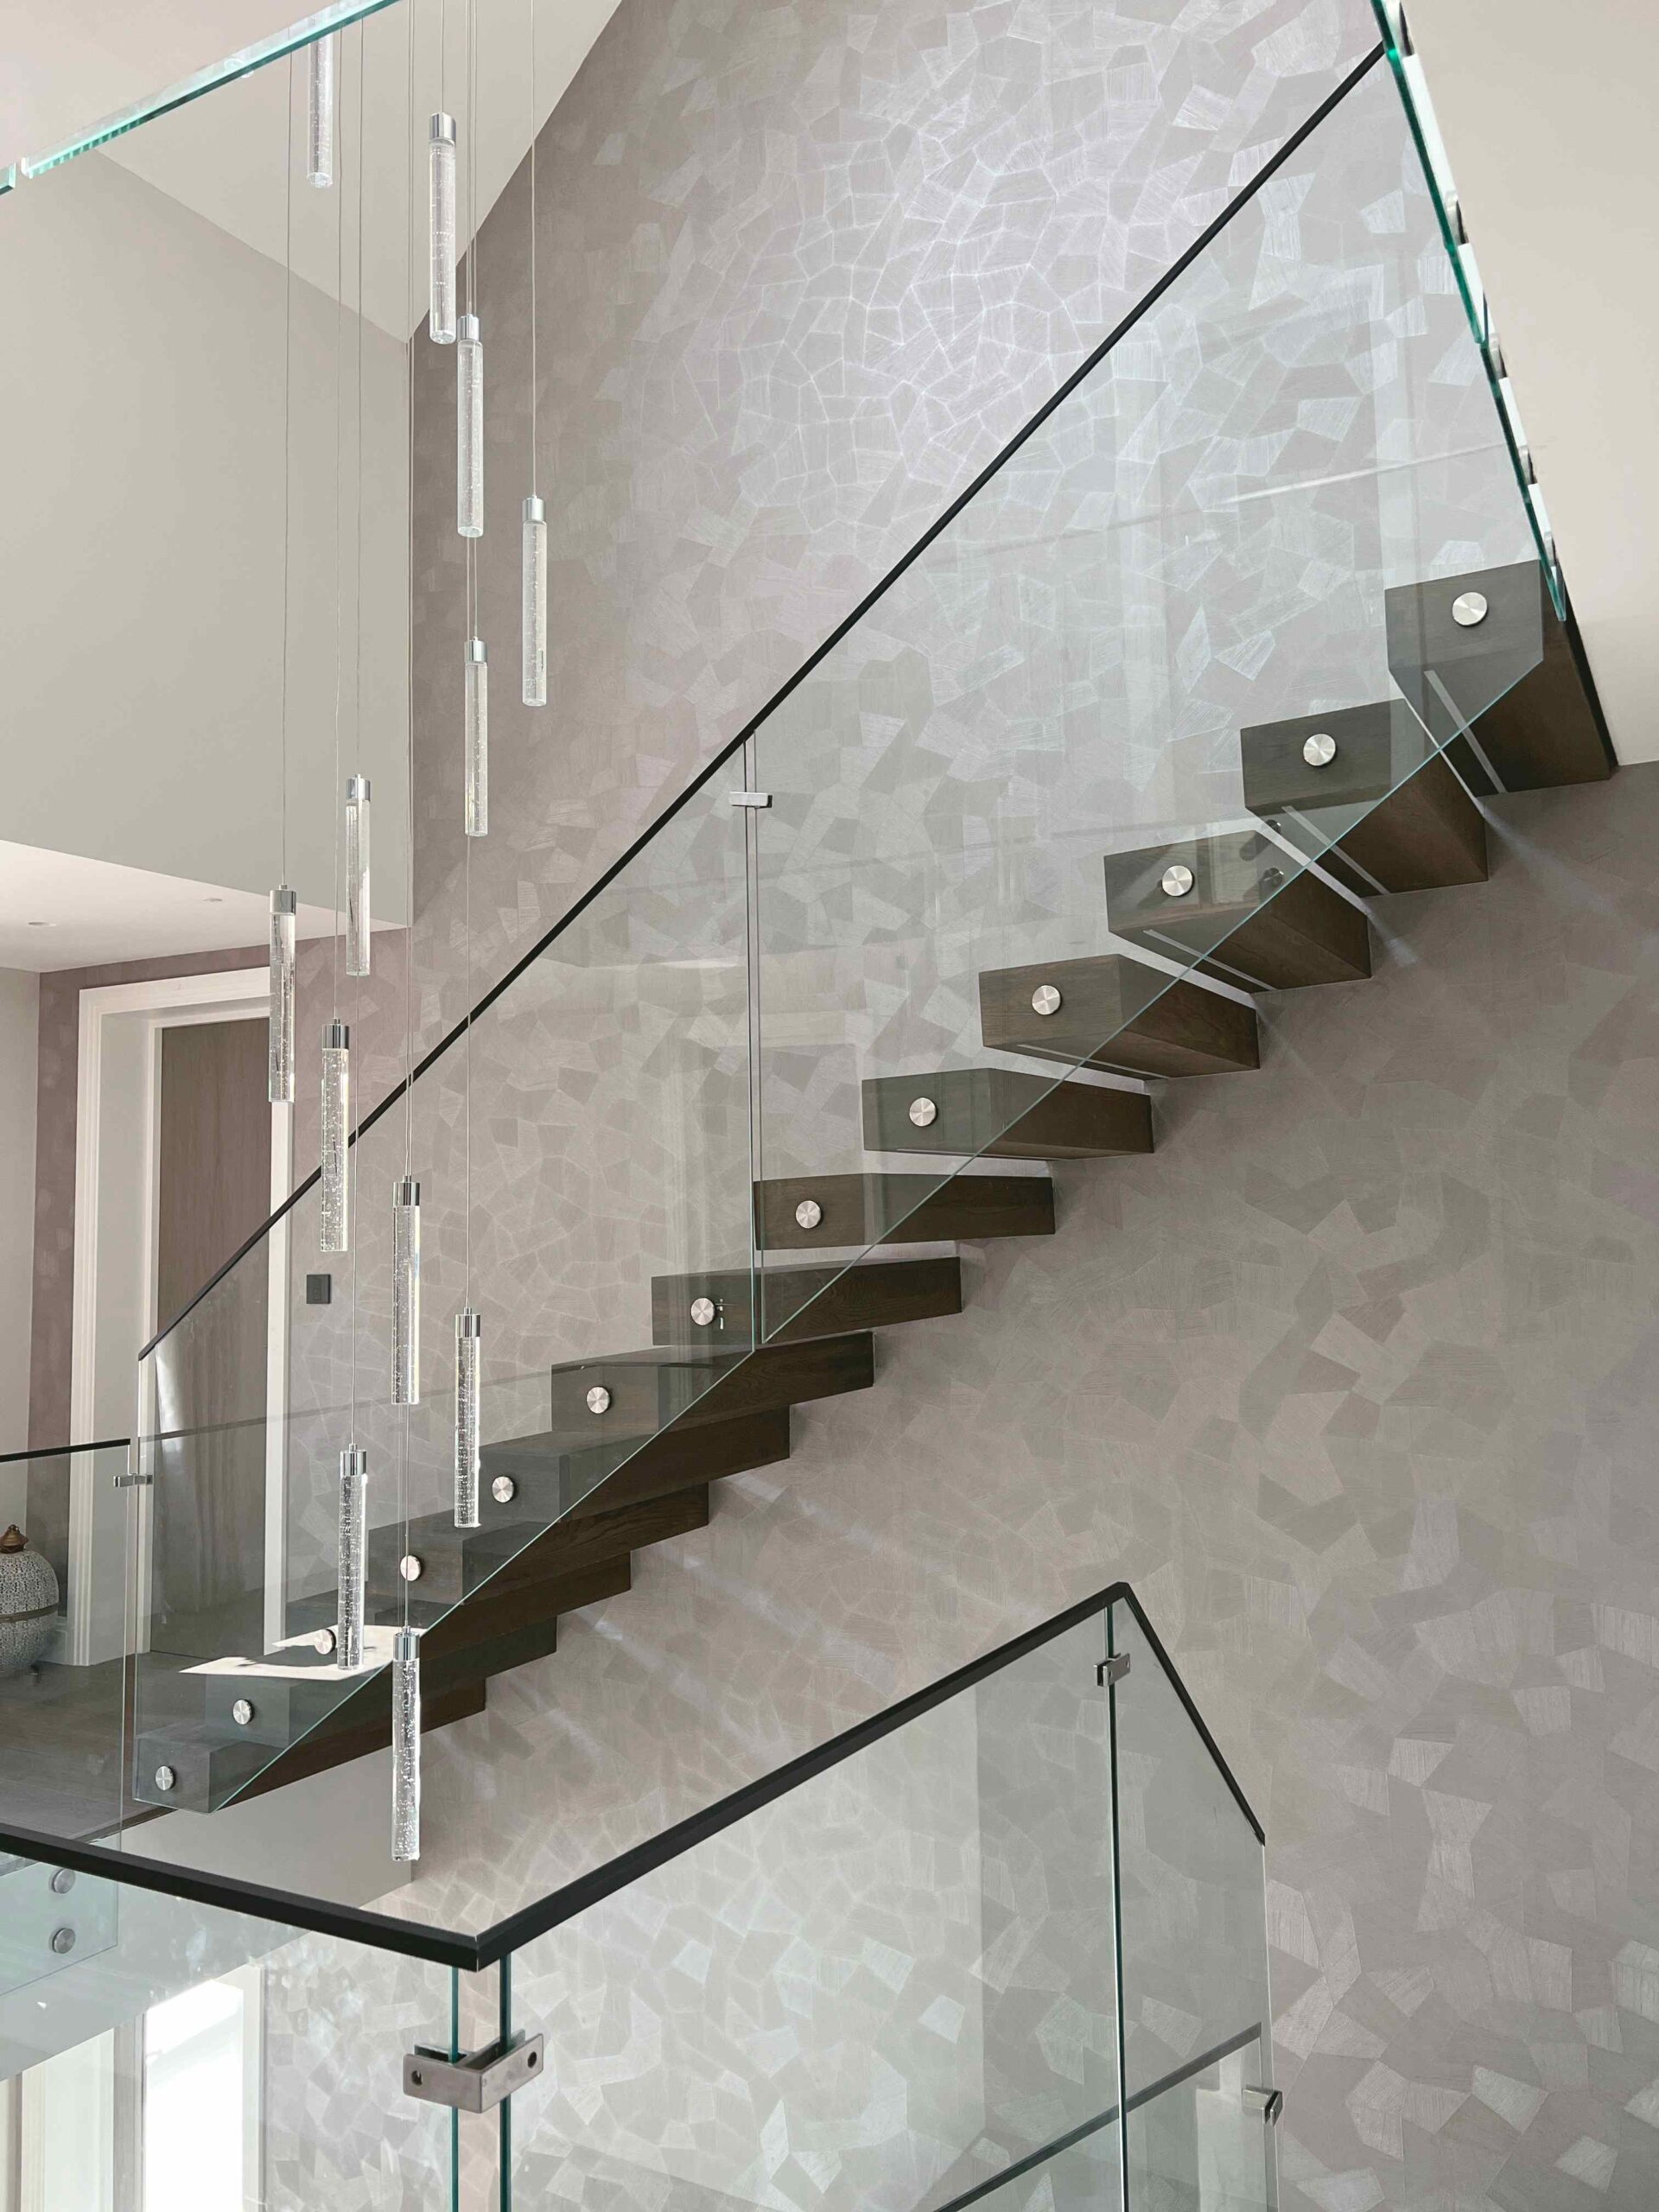 side view of a Floating staircase with glass balustrade